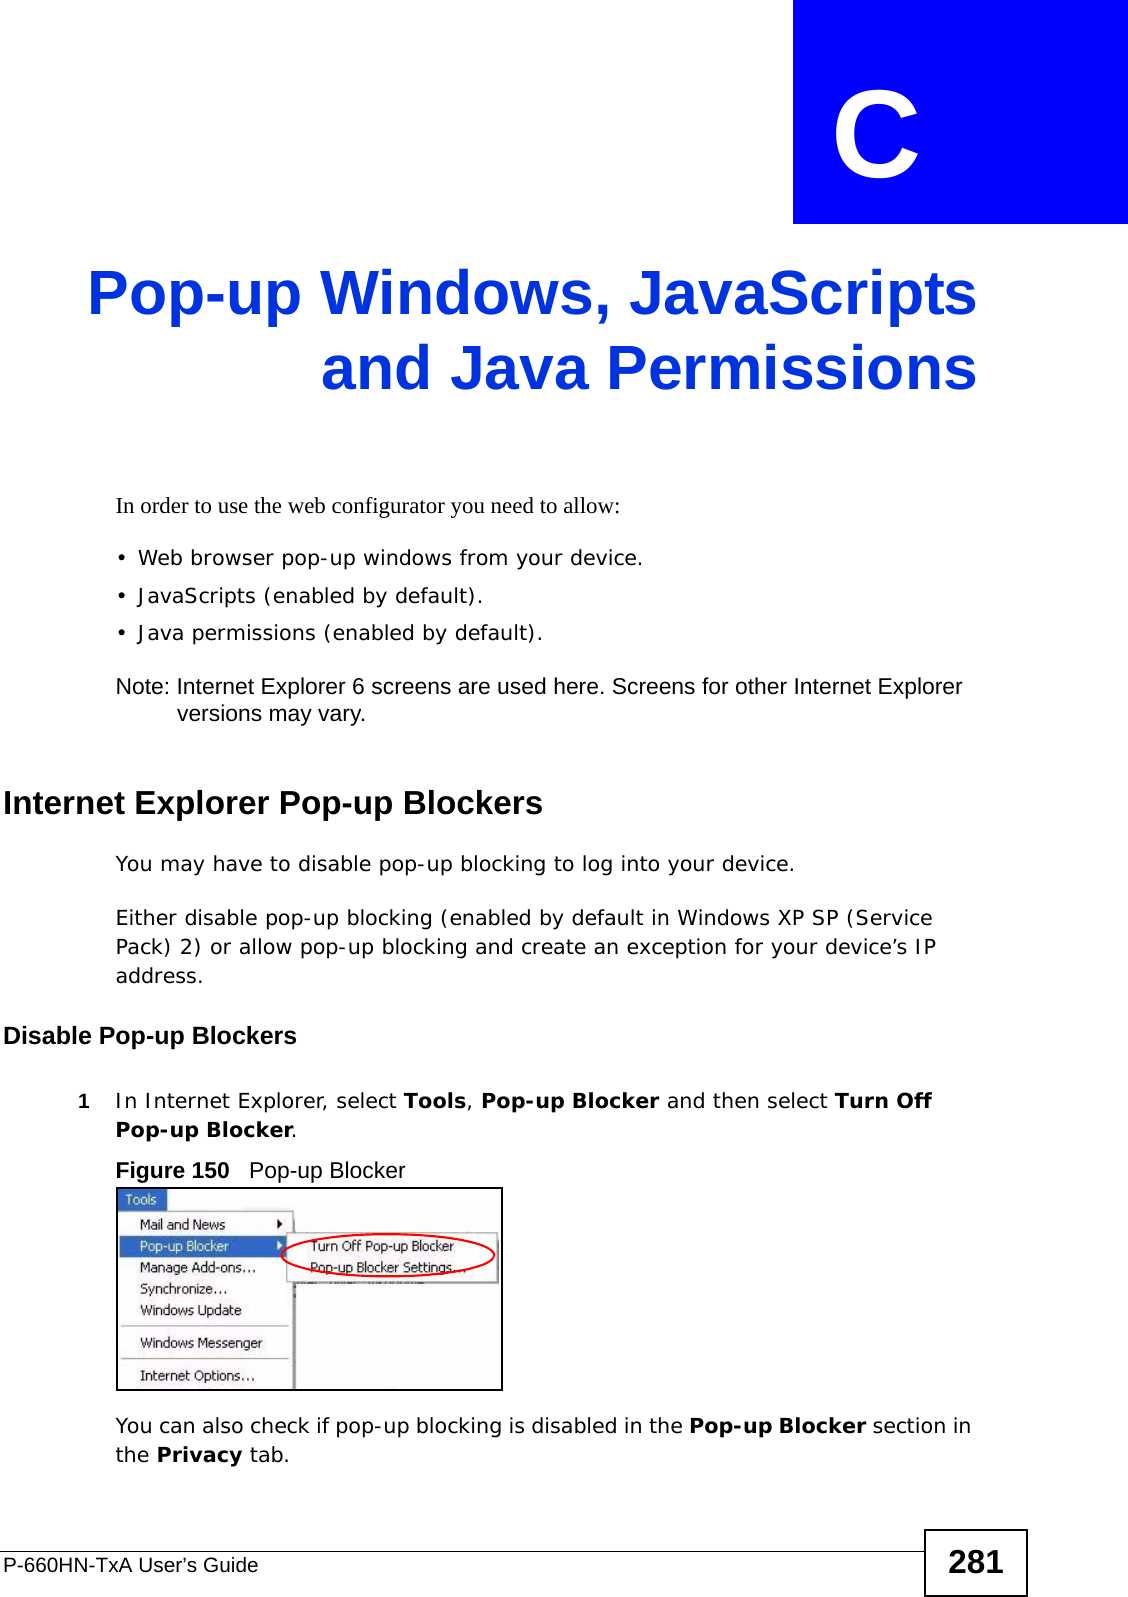 P-660HN-TxA User’s Guide 281APPENDIX  C Pop-up Windows, JavaScriptsand Java PermissionsIn order to use the web configurator you need to allow:• Web browser pop-up windows from your device.• JavaScripts (enabled by default).• Java permissions (enabled by default).Note: Internet Explorer 6 screens are used here. Screens for other Internet Explorer versions may vary.Internet Explorer Pop-up BlockersYou may have to disable pop-up blocking to log into your device. Either disable pop-up blocking (enabled by default in Windows XP SP (Service Pack) 2) or allow pop-up blocking and create an exception for your device’s IP address.Disable Pop-up Blockers1In Internet Explorer, select Tools, Pop-up Blocker and then select Turn Off Pop-up Blocker. Figure 150   Pop-up BlockerYou can also check if pop-up blocking is disabled in the Pop-up Blocker section in the Privacy tab. 